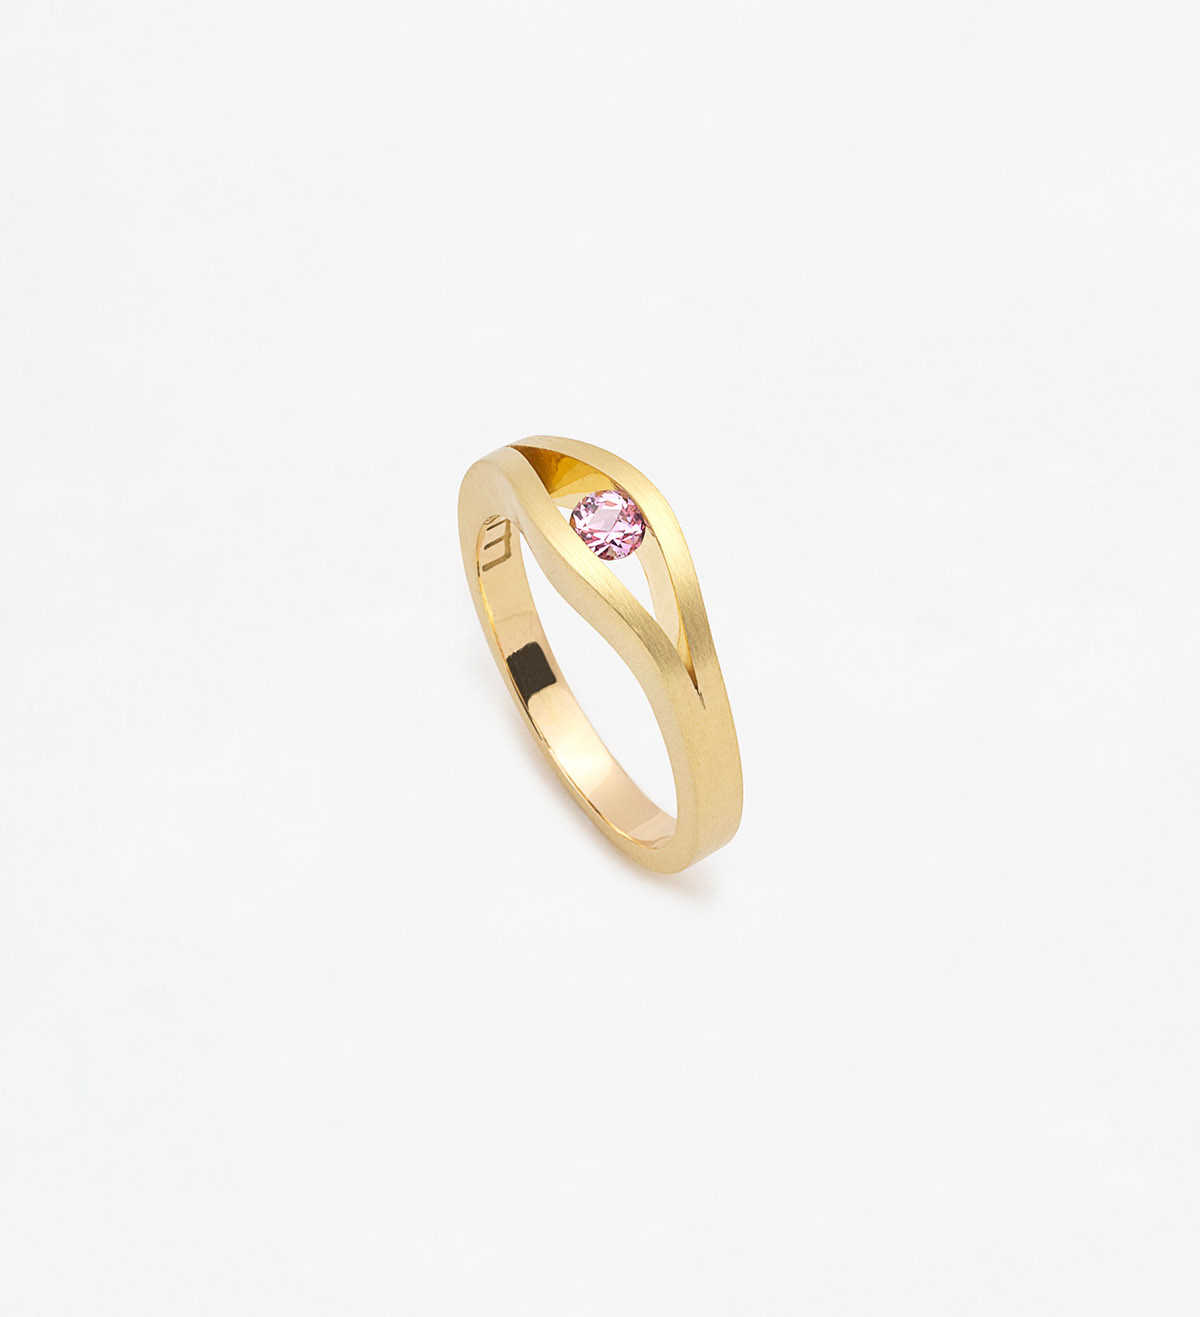 18k gold ring with rose Wennick-lefevre sapphire 0,21ct